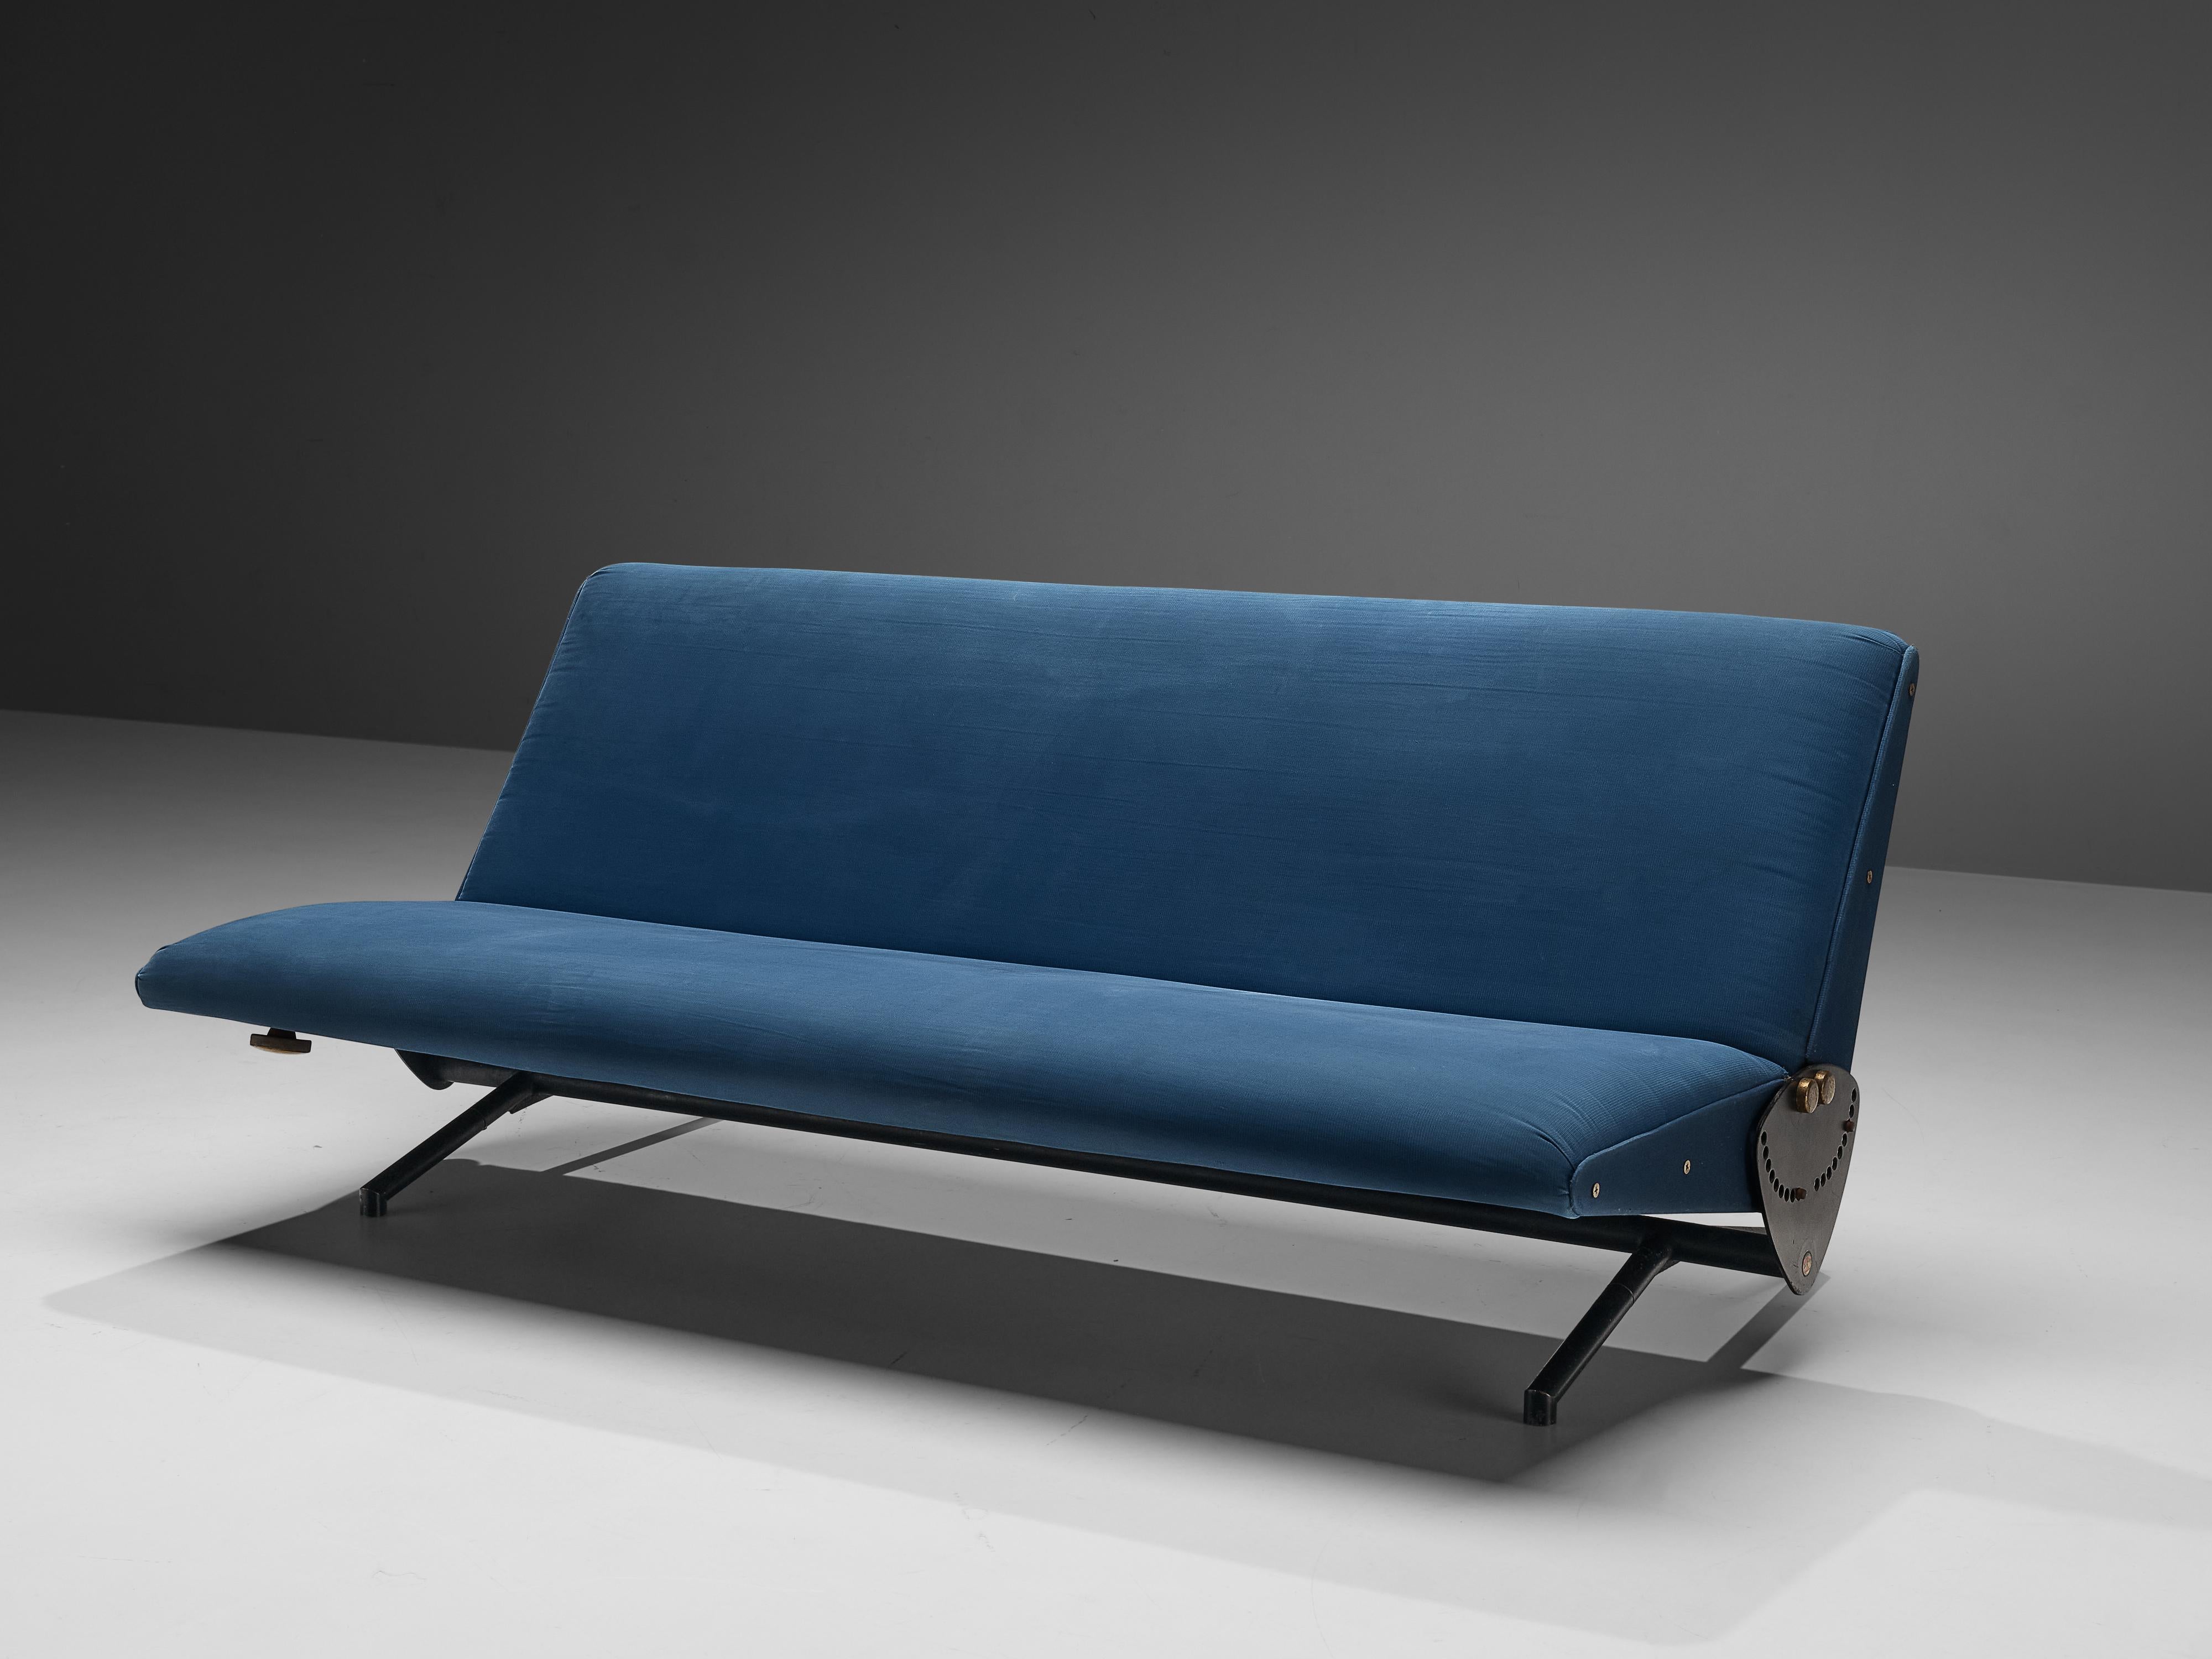 Osvaldo Borsani for Tecno, sofa 'D70', steel, brass, blue fabric upholstery, Italy, 1954

A sofa that transforms to a daybed designed by Osvaldo Borsani in 1954. Extraordinary elegance in form, and also outstanding in a technical sense. With a